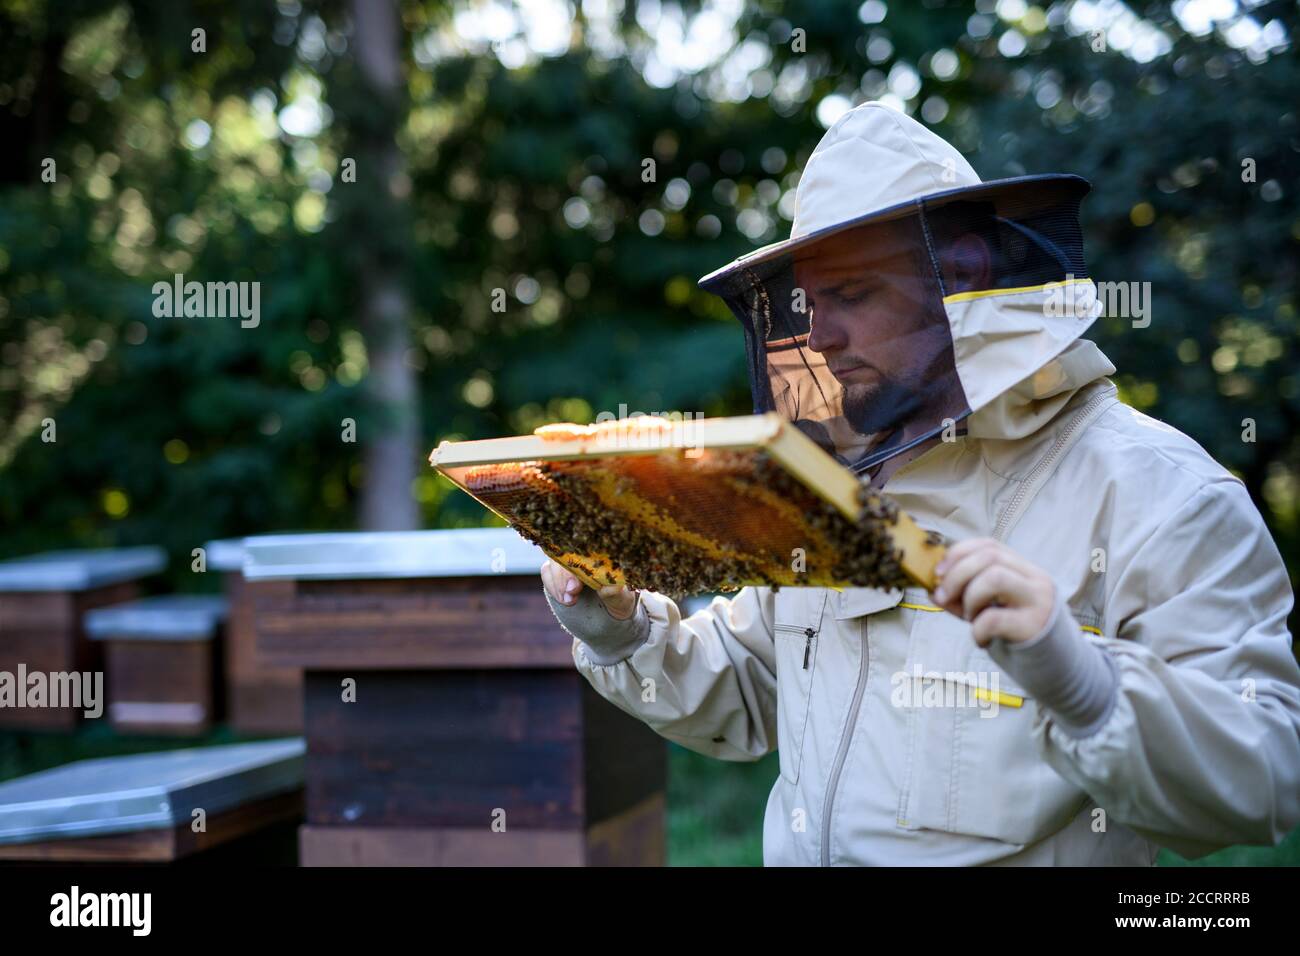 Portrait of man beekeeper holding honeycomb frame full of bees in apiary. Stock Photo